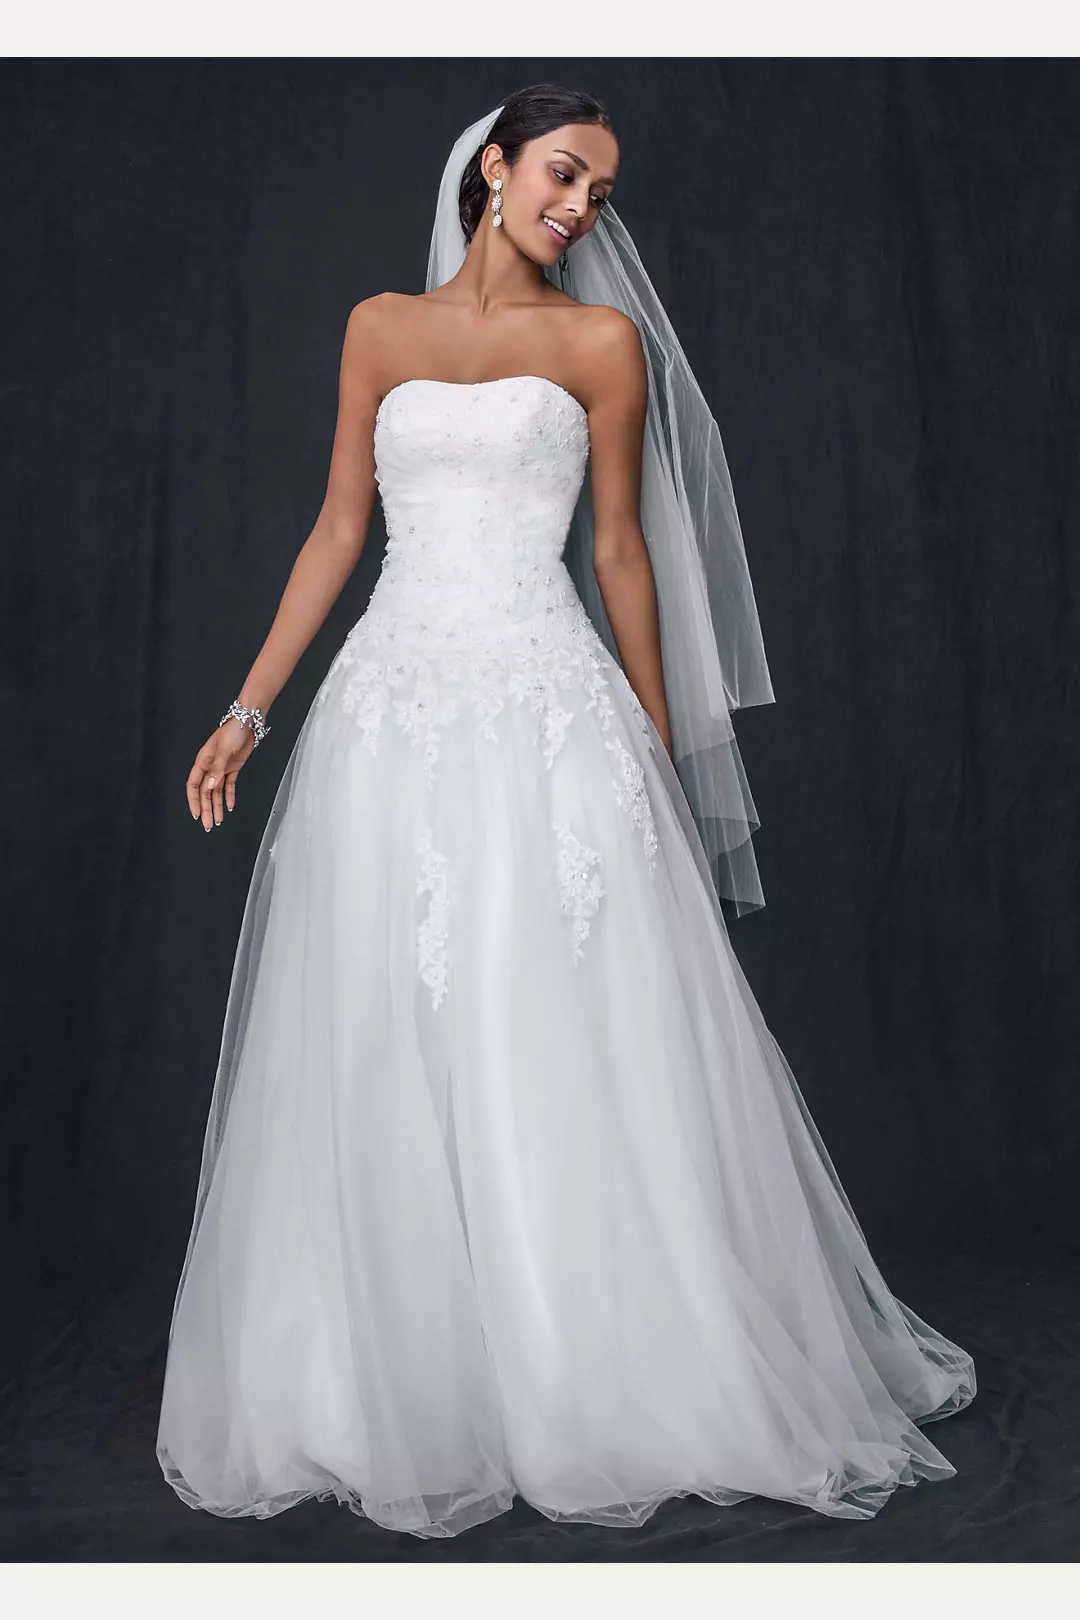 Strapless Plus Size A-Line Wedding Dress with Cotton Lace